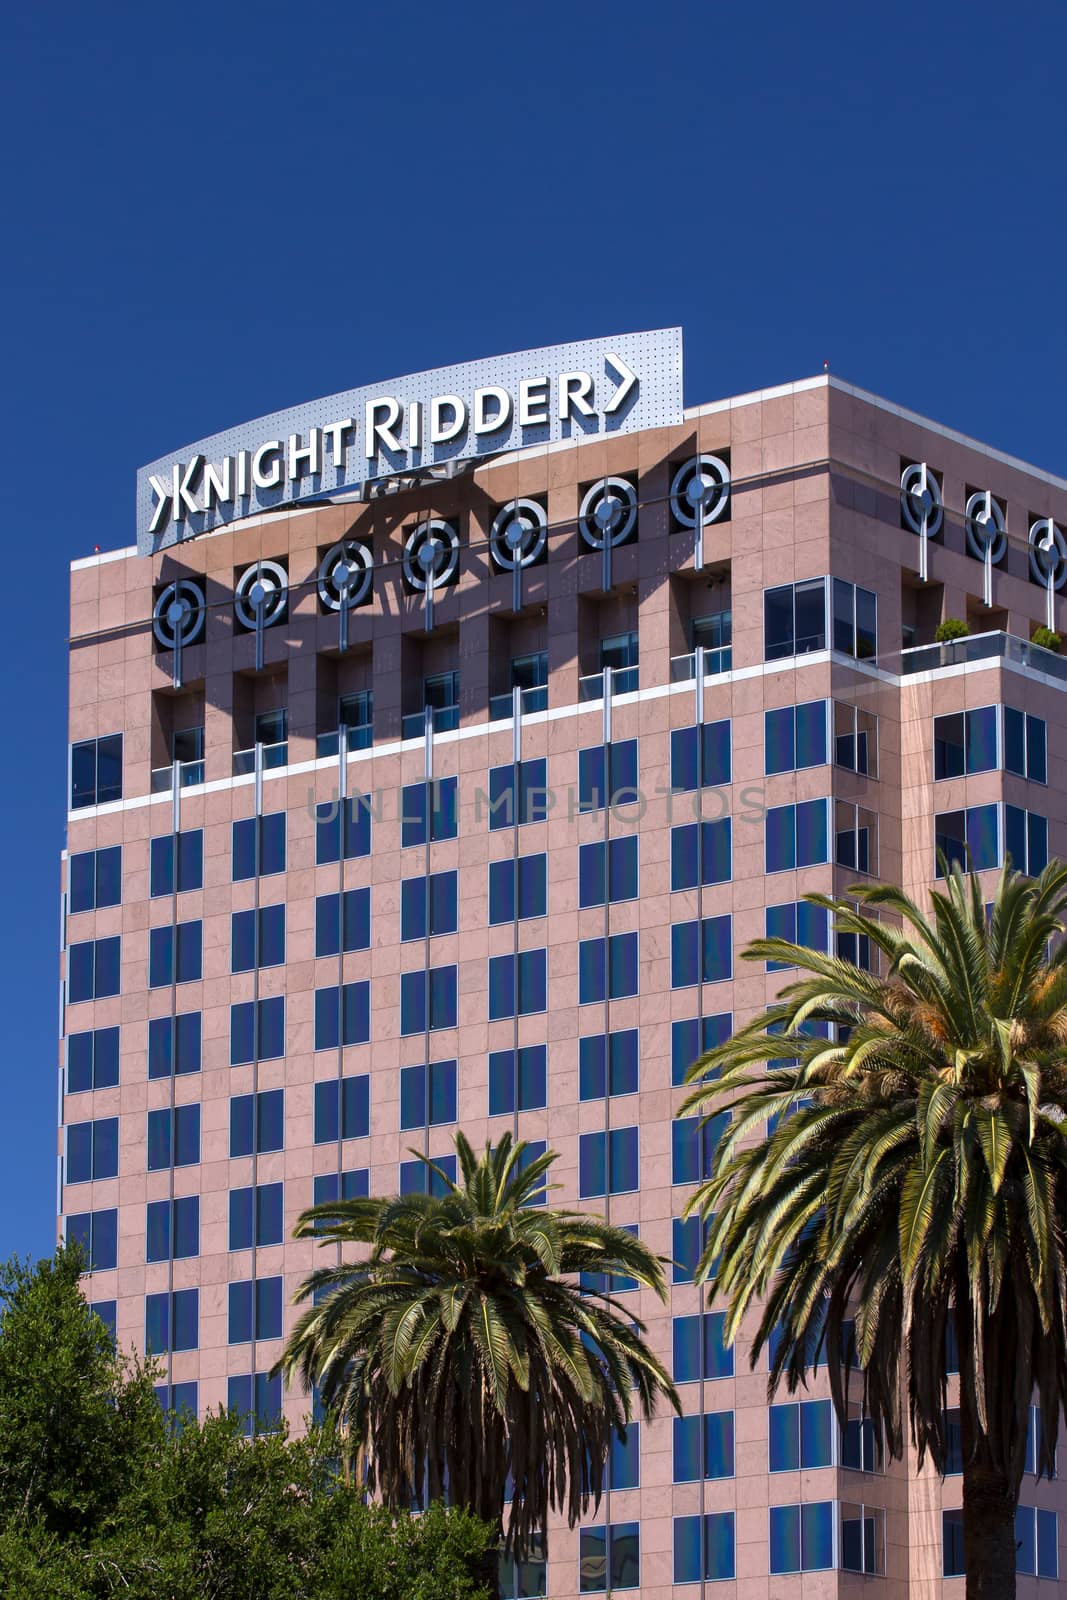 SAN JOSE,CA/USA - MAY 11, 2014: The landmark Knight Ridder building in downtown San Jose, California.  Knight Ridder was an American media company until bought by The McClatchy Company in 2006.